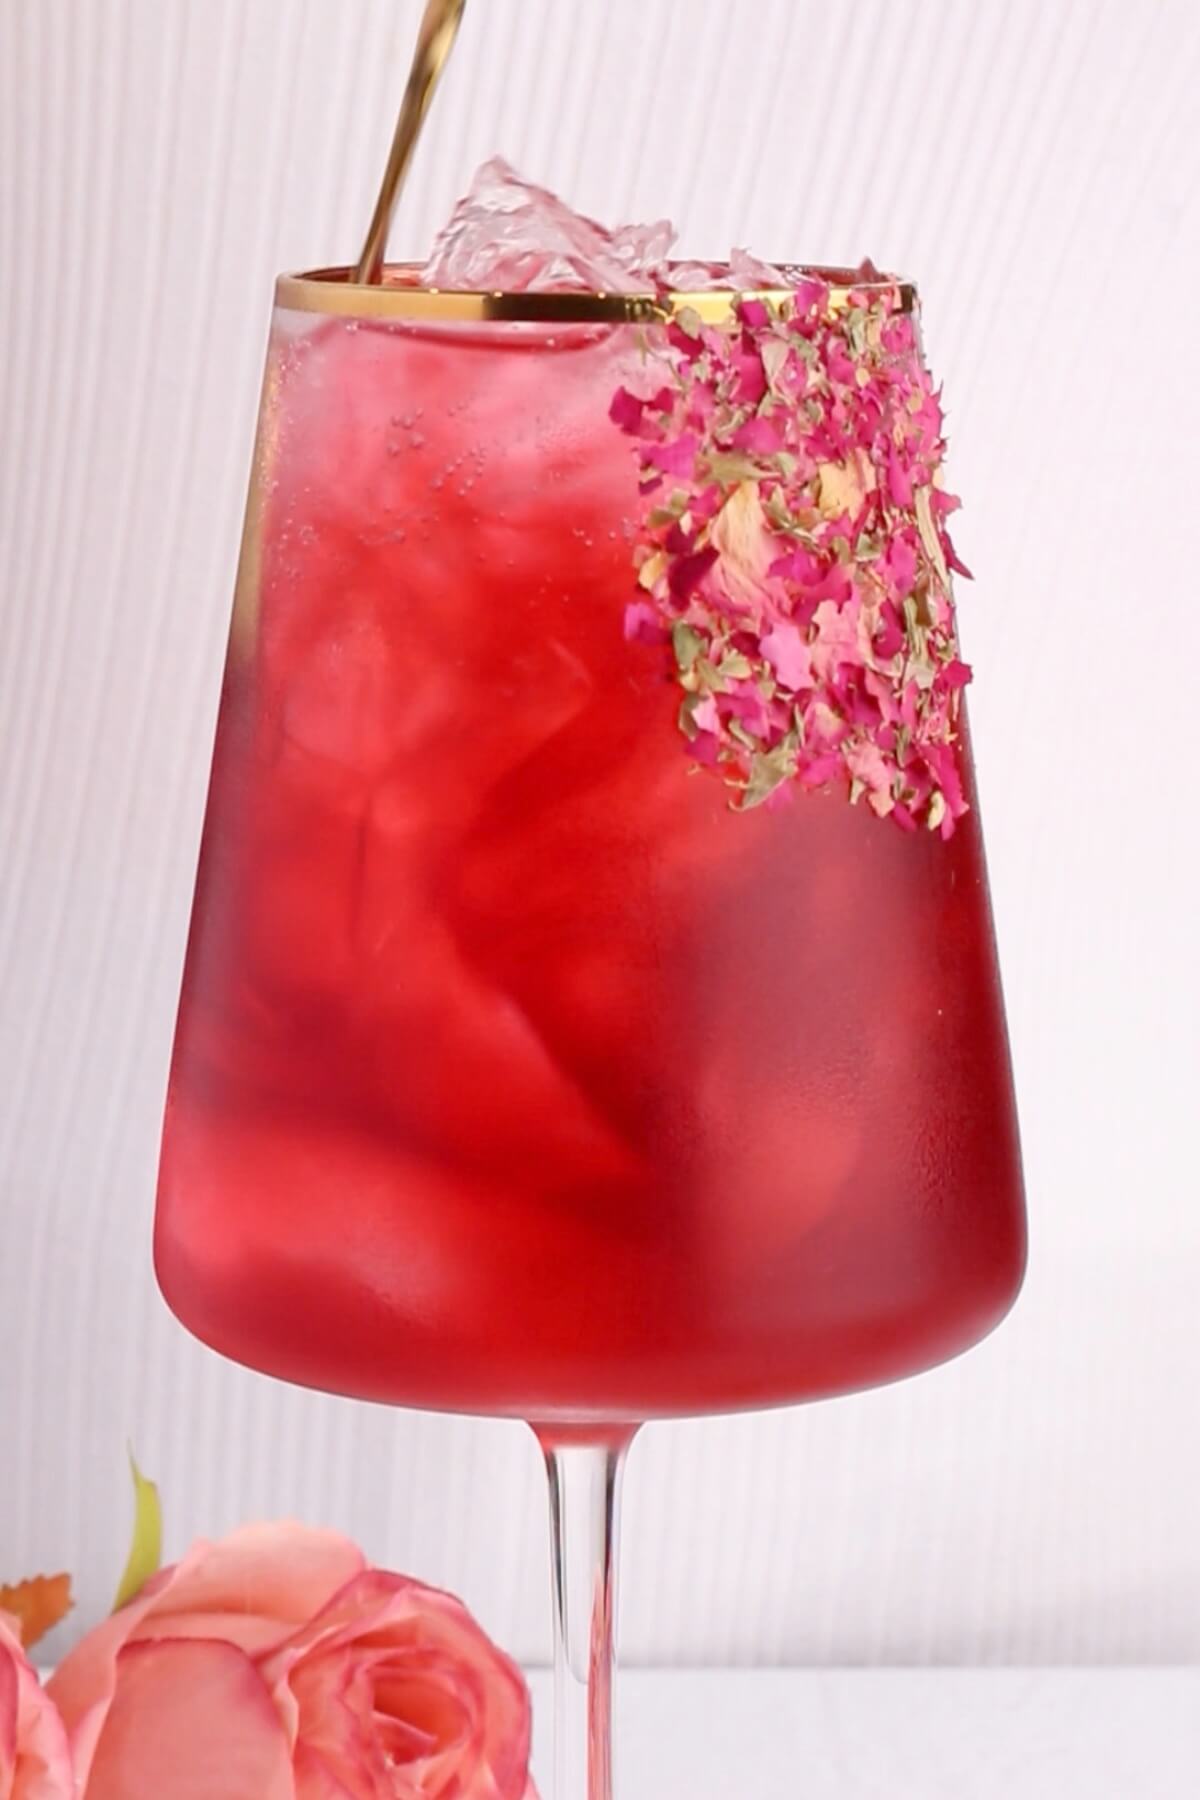 close up of pink mocktail recipe in a wine glass that has a gold rim and edible rose petals stuck on the side.